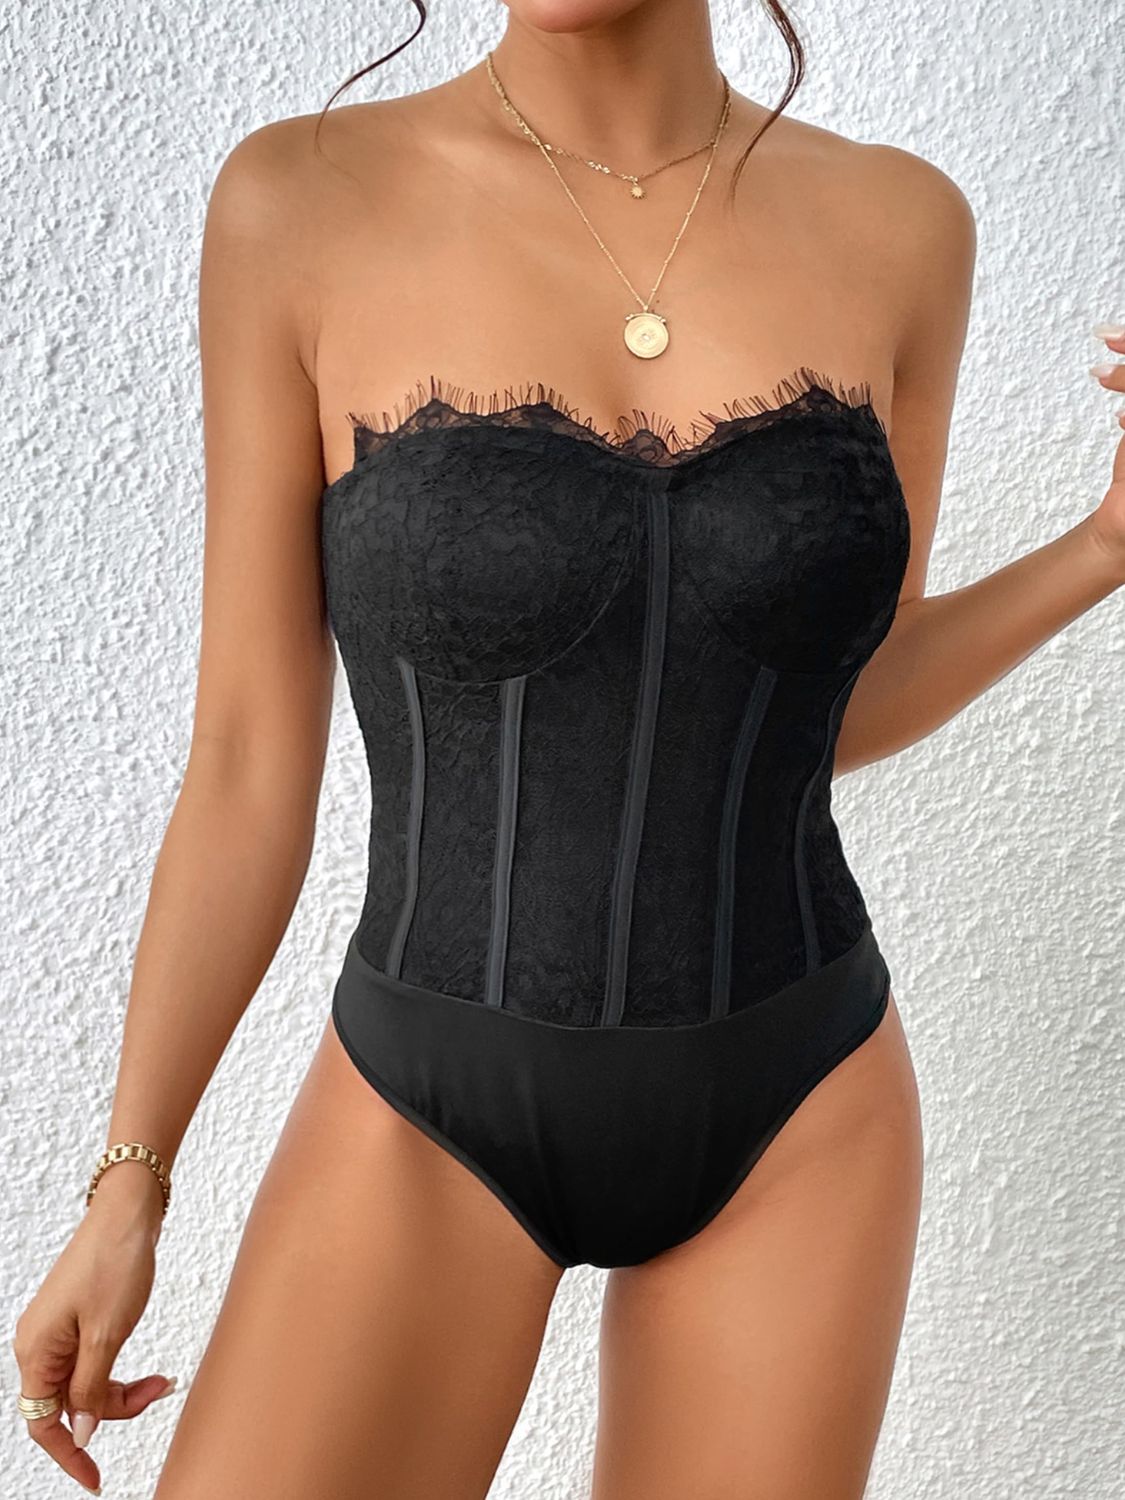 Strapless Sweetheart Neck Bodysuit - Women’s Clothing & Accessories - Shirts & Tops - 5 - 2024